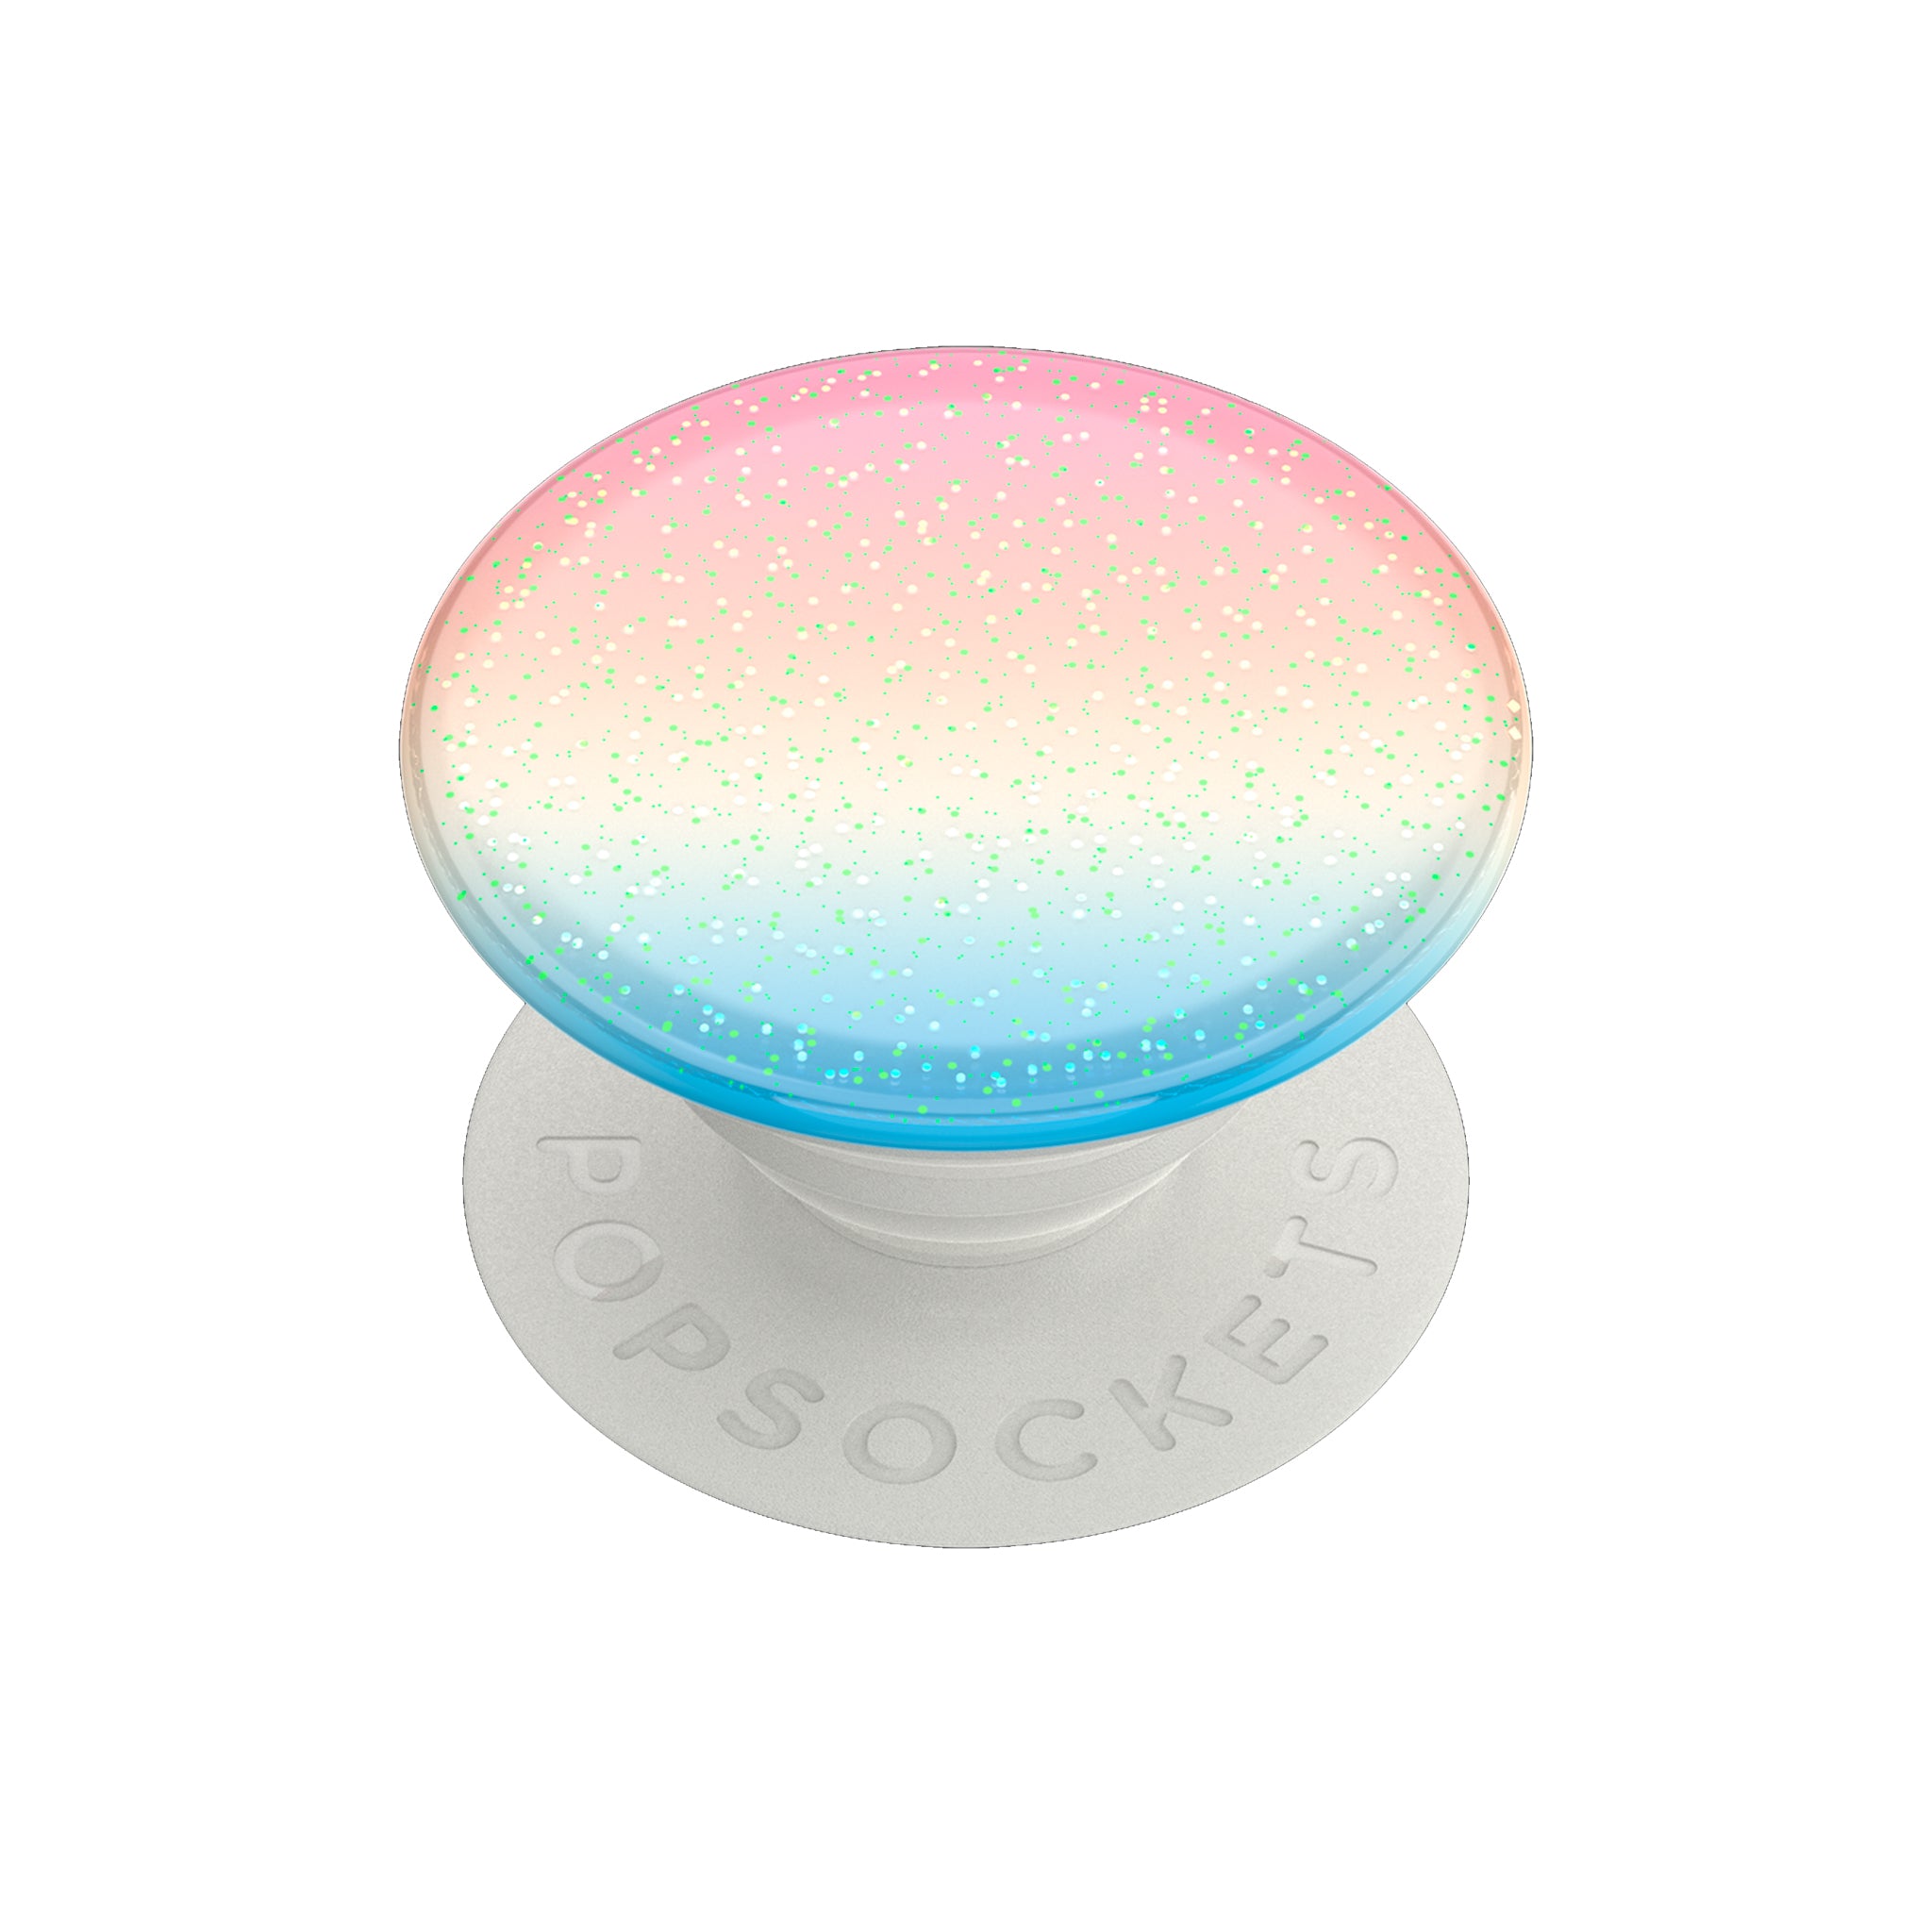 Popsockets - Popgrip Premium Swappable Device Stand And Grip - Glitter Pastel Morning